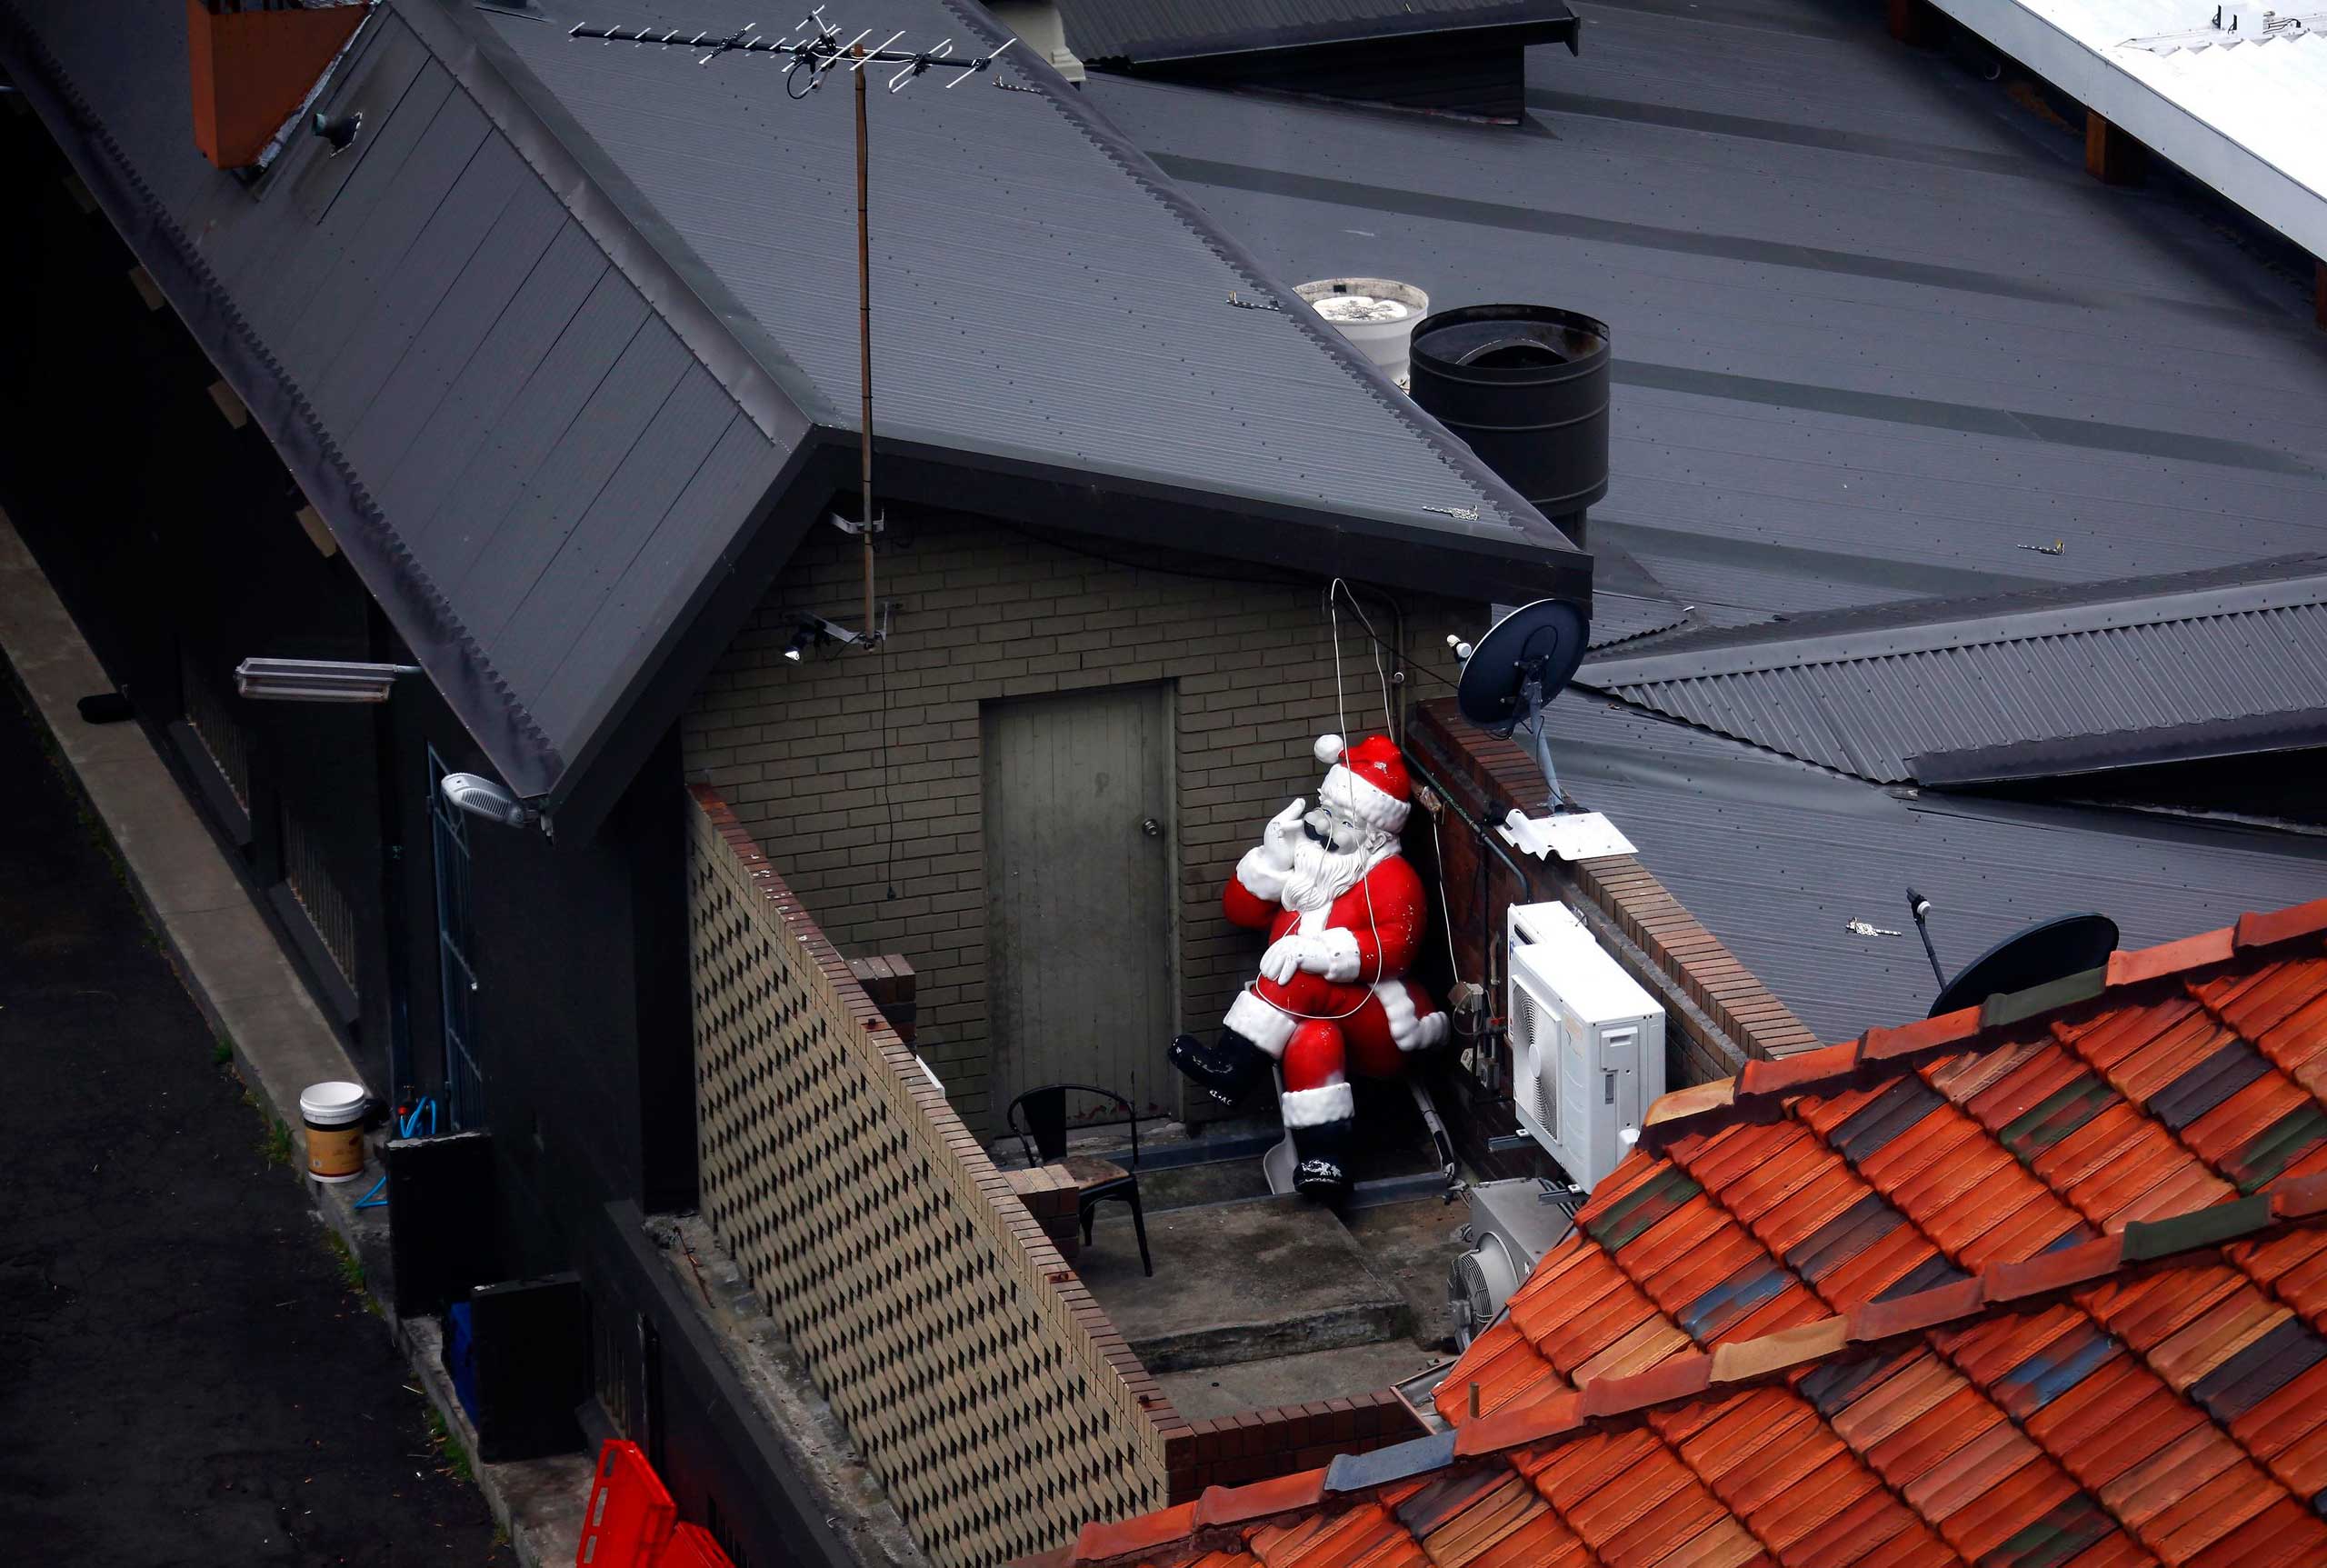 Nov. 10, 2014. A statue of Santa Claus, part of Christmas decorations for a pub in Sydney, can be seen placed at the back of the building before being put on display.